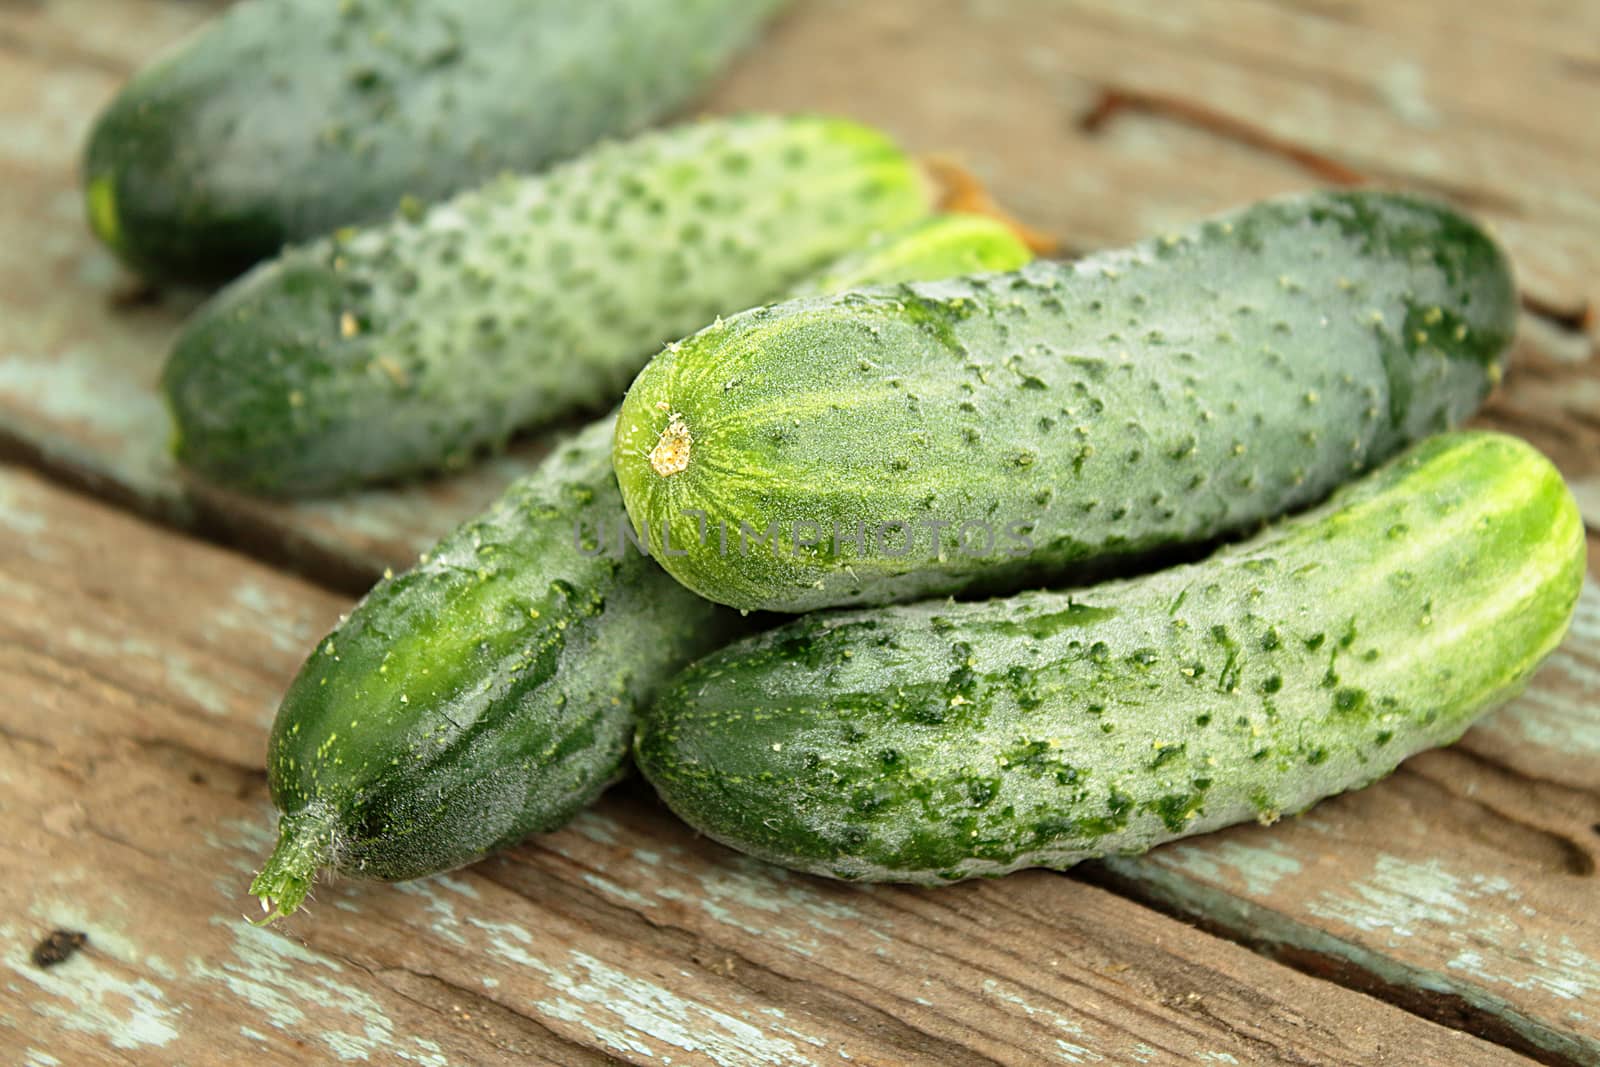 Freshly picked cucumbers, unwashed, on a wooden surface